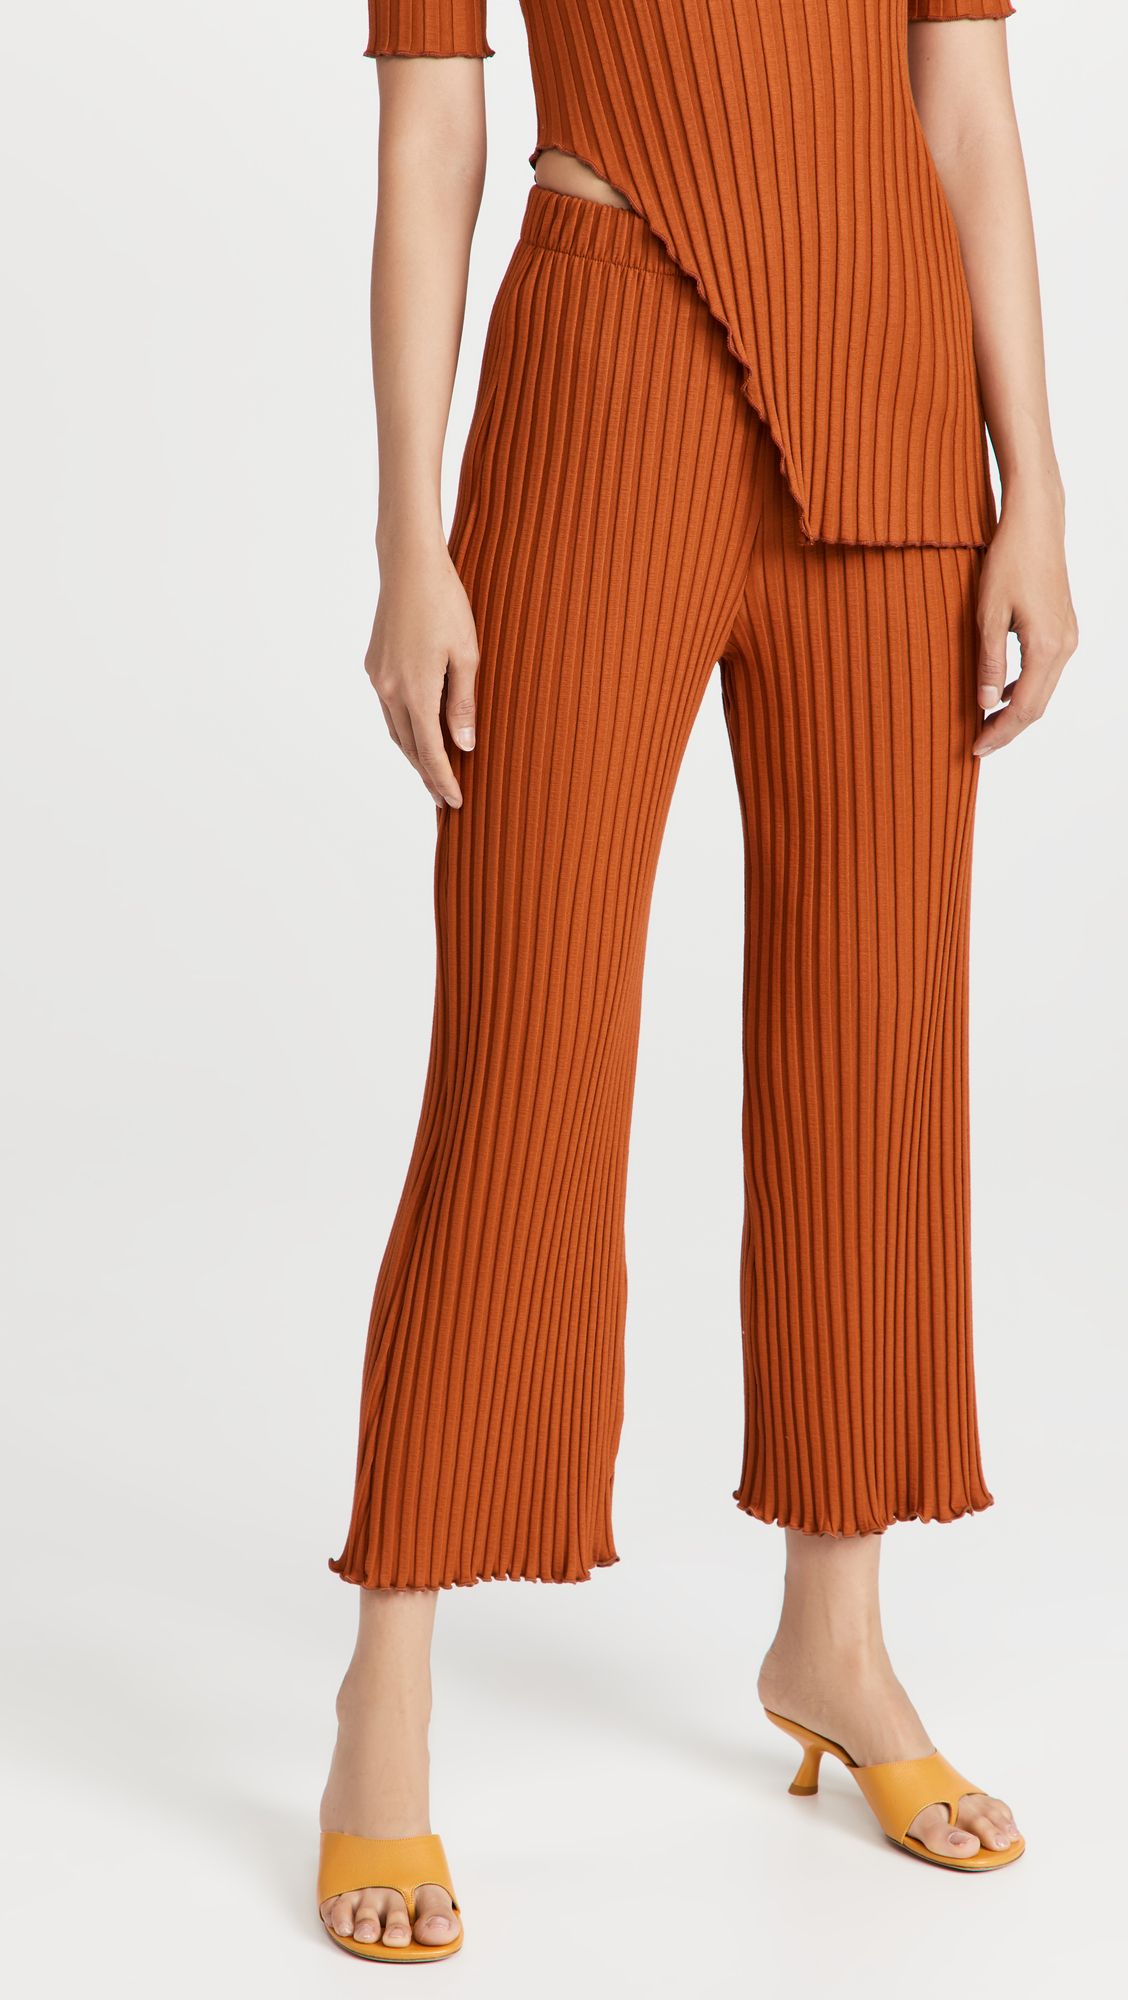 The 29 Best Wide-Leg Pants to Add to Your Wardrobe in 2021 | Who What Wear